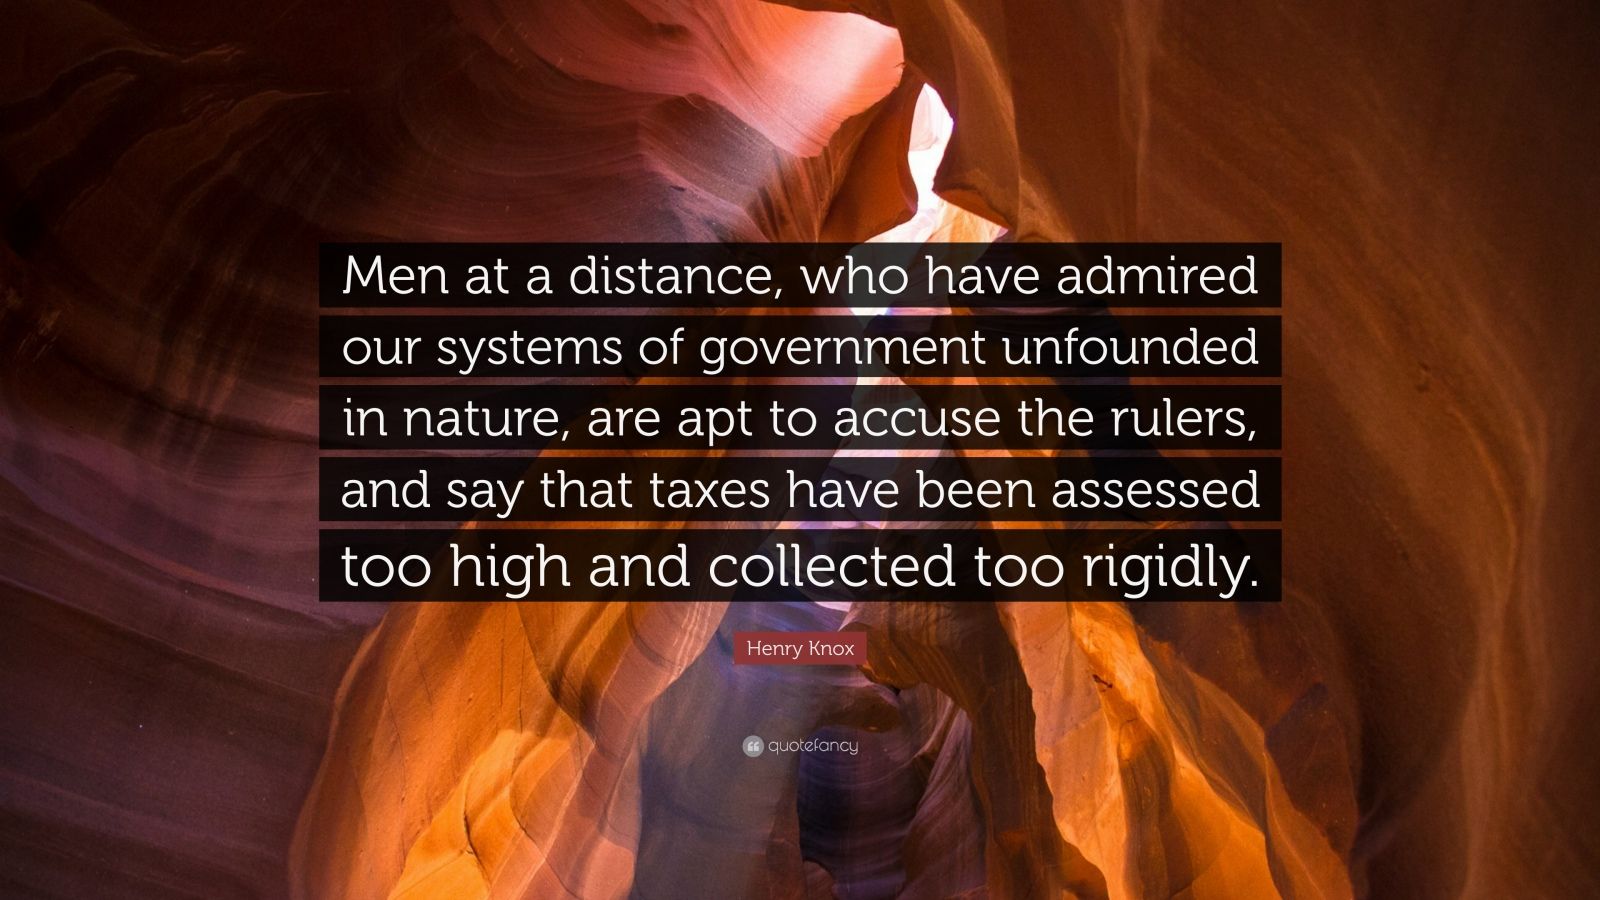 Henry Knox Quotes (9 wallpapers) - Quotefancy